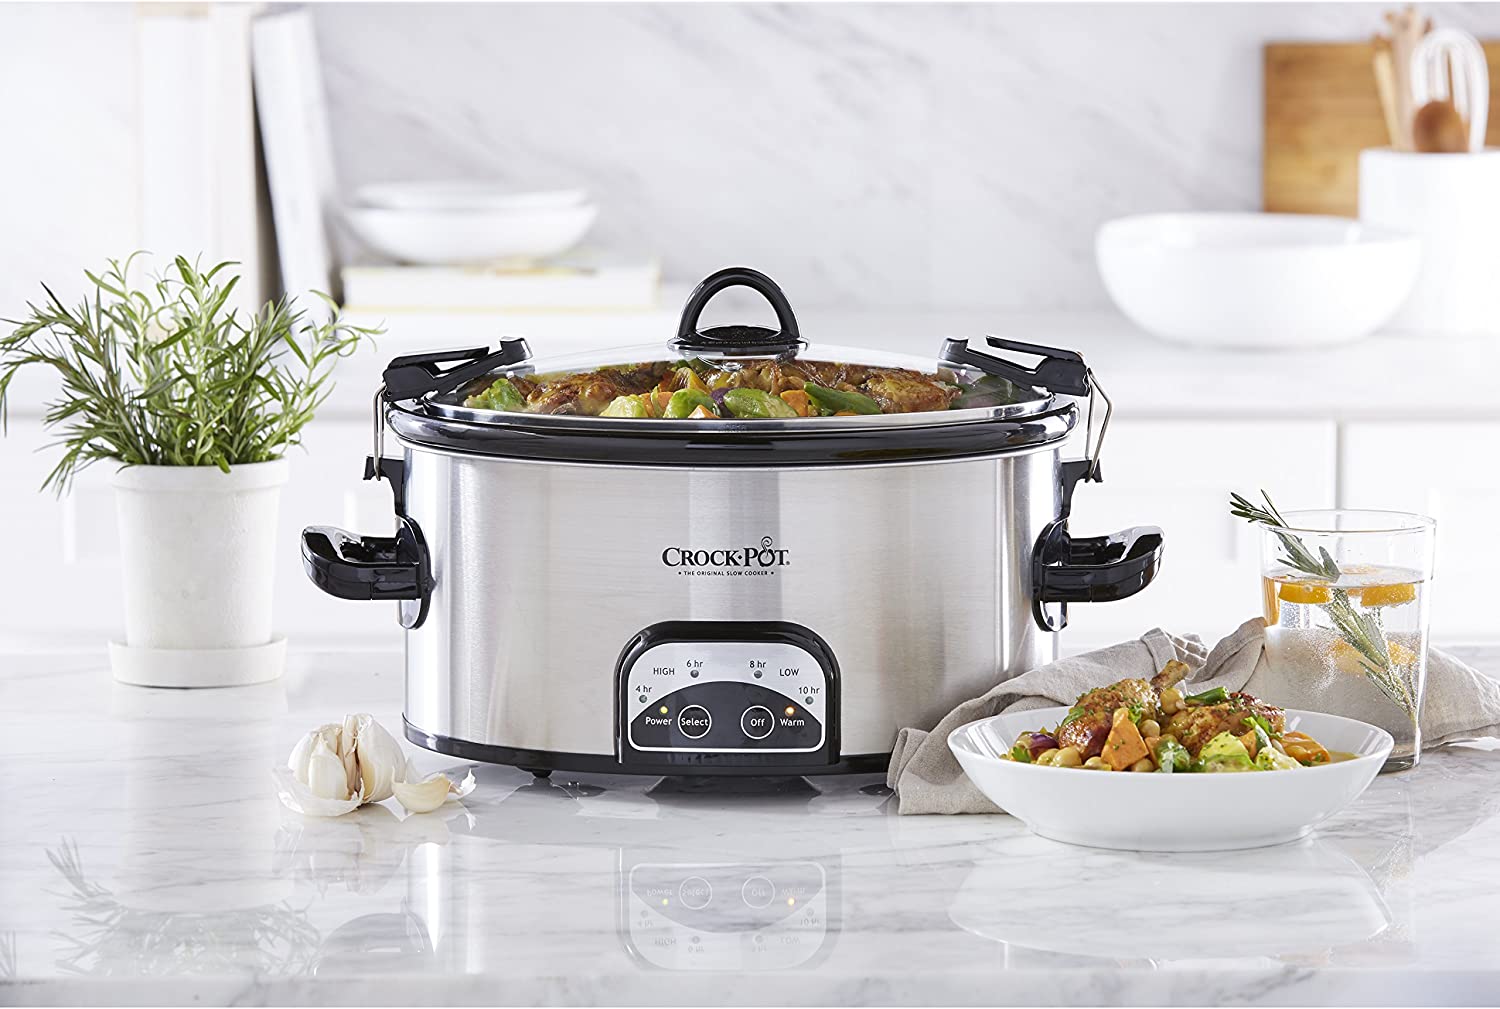 Crock-Pot 6-Quart Programmable Cook & Carry Oval Slow Cooker, Stainless Steel - image 5 of 5